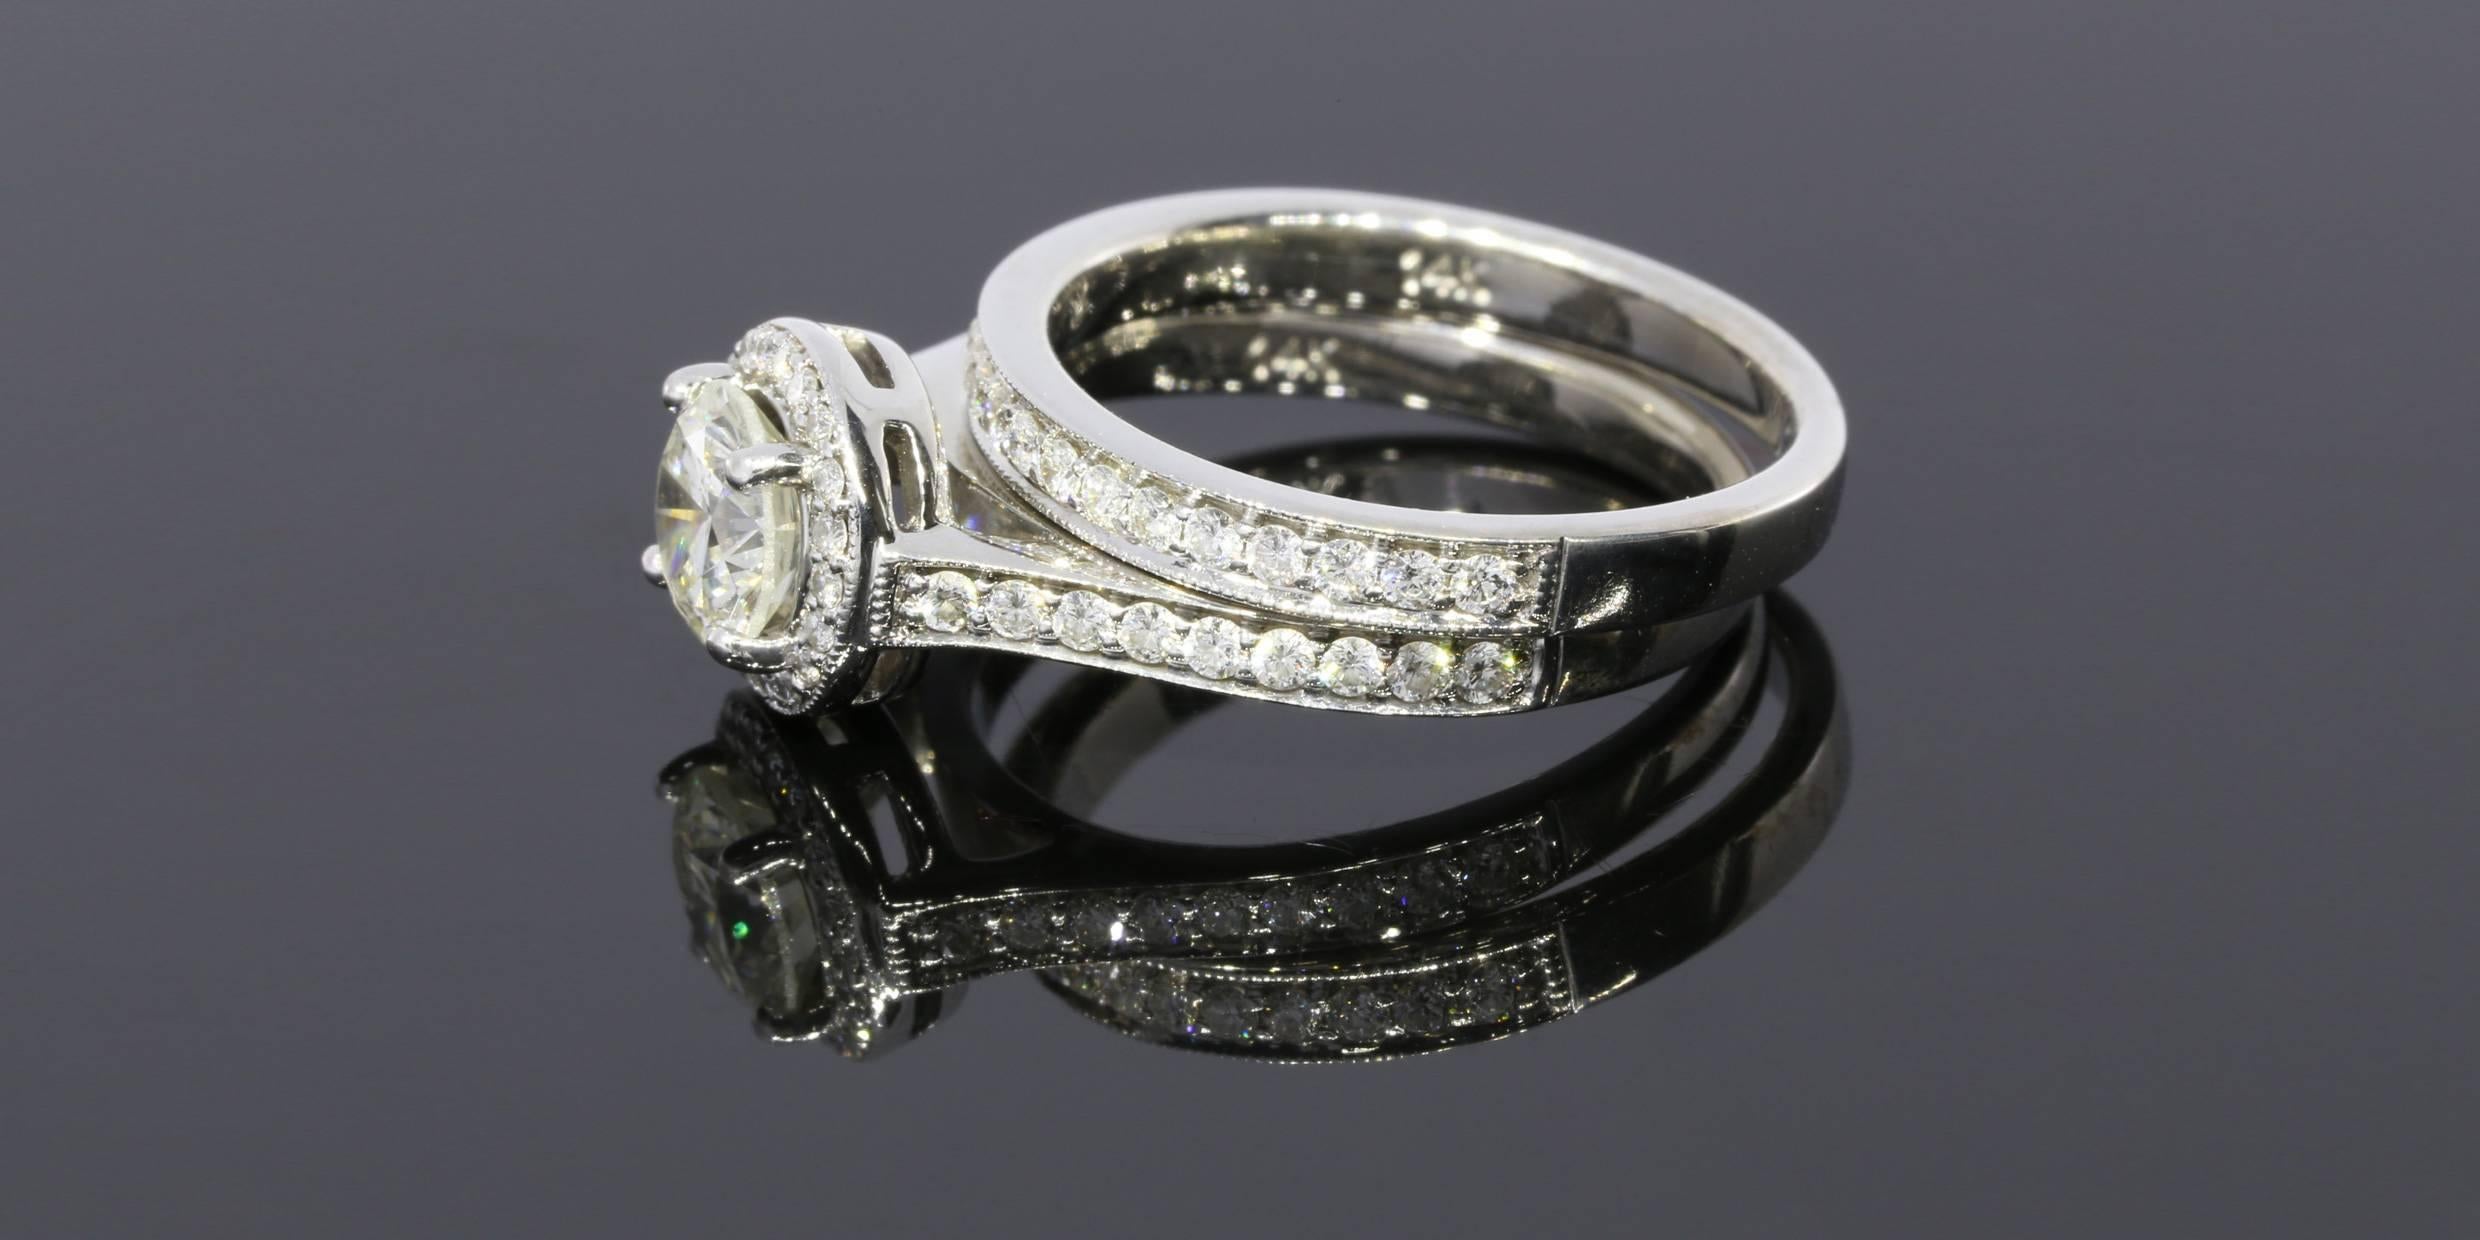 This beautiful bridal set has a total weight of 1.18 carats and features a gorgeous halo engagement ring and matching wedding band. Both are set in 14 karat white gold with milgrain edges and a bright finish.

The engagement ring has a fiery, .73